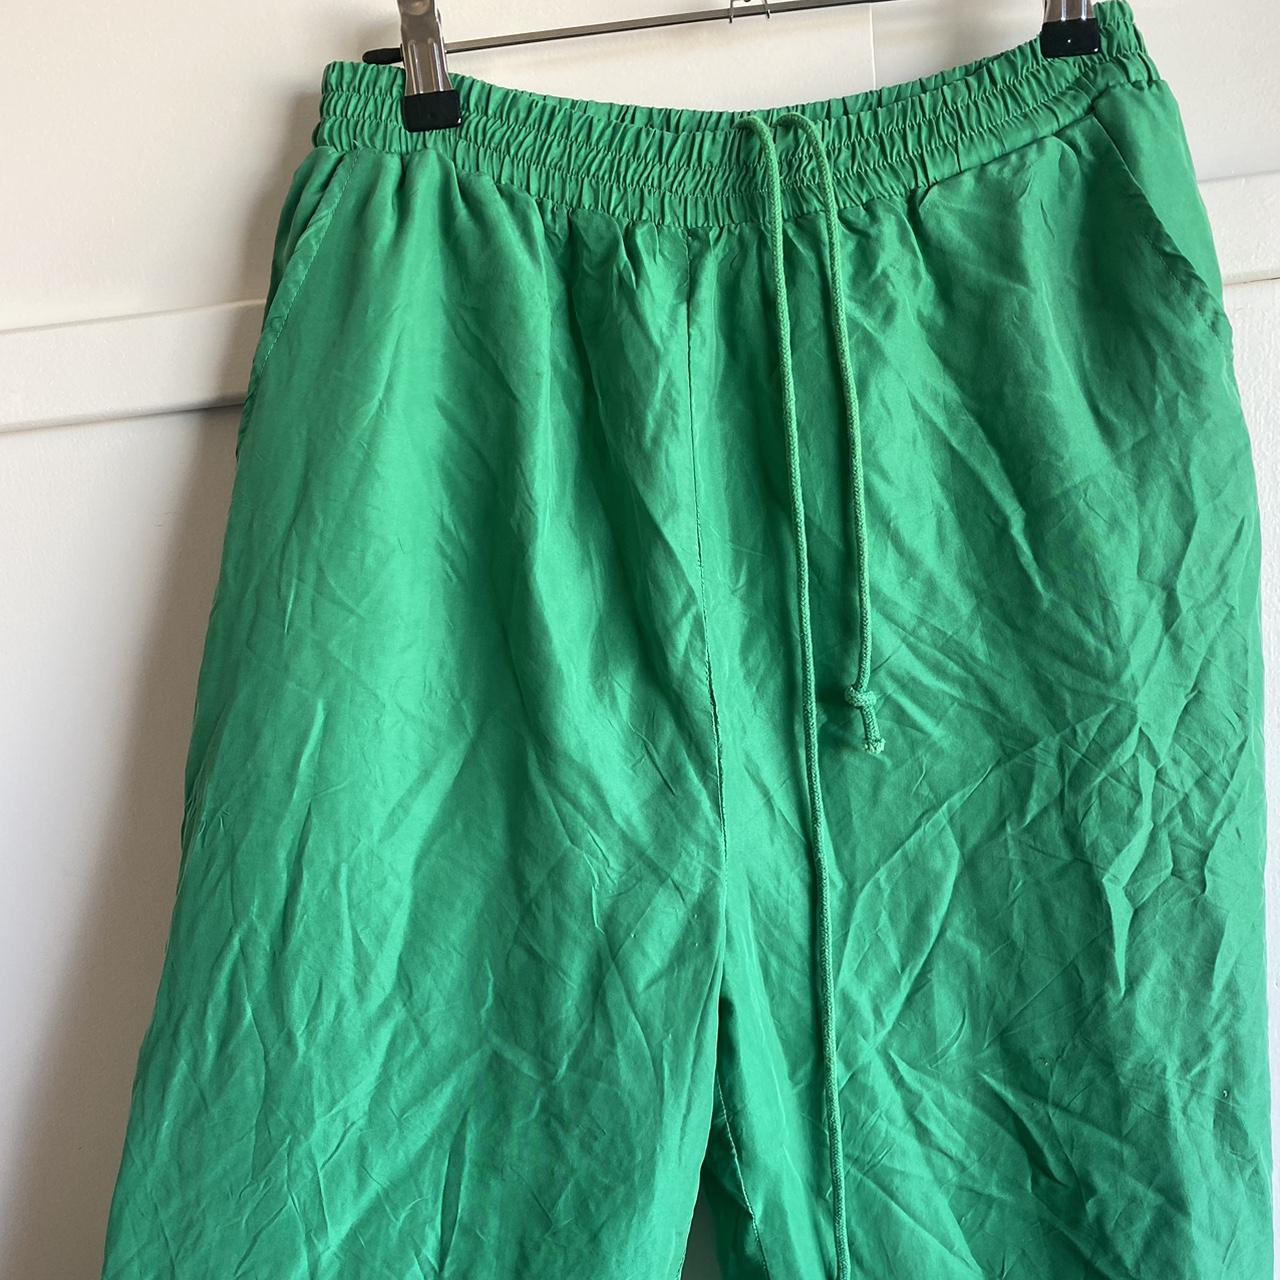 Epic emerald green silk trackies with lots of fab... - Depop